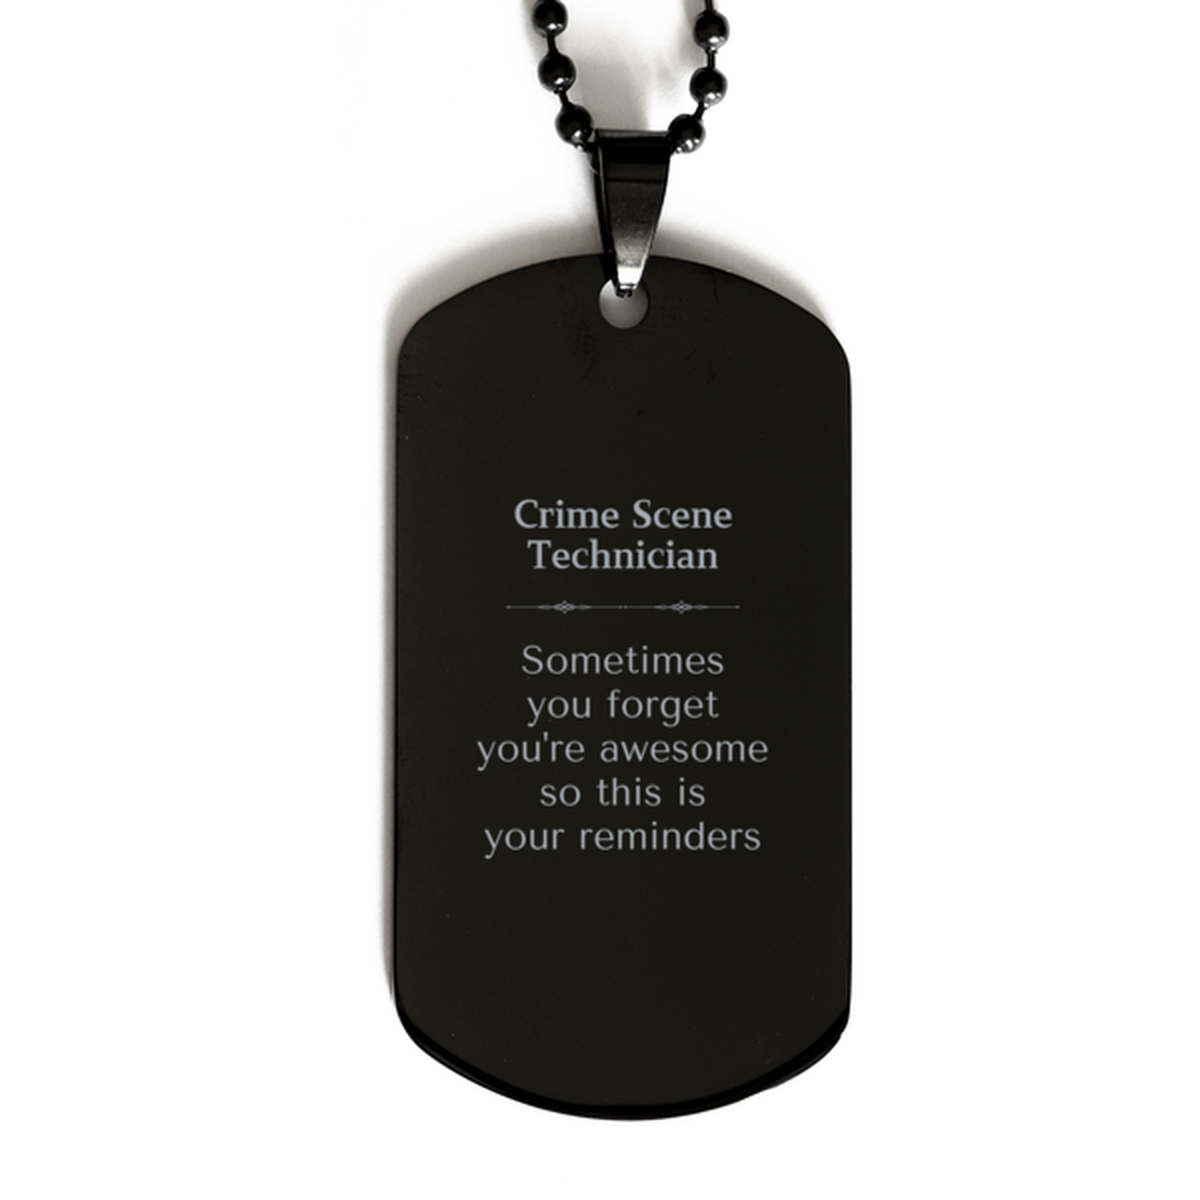 Sentimental Crime Scene Technician Black Dog Tag, Crime Scene Technician Sometimes you forget you're awesome so this is your reminders, Graduation Christmas Birthday Gifts for Crime Scene Technician, Men, Women, Coworkers